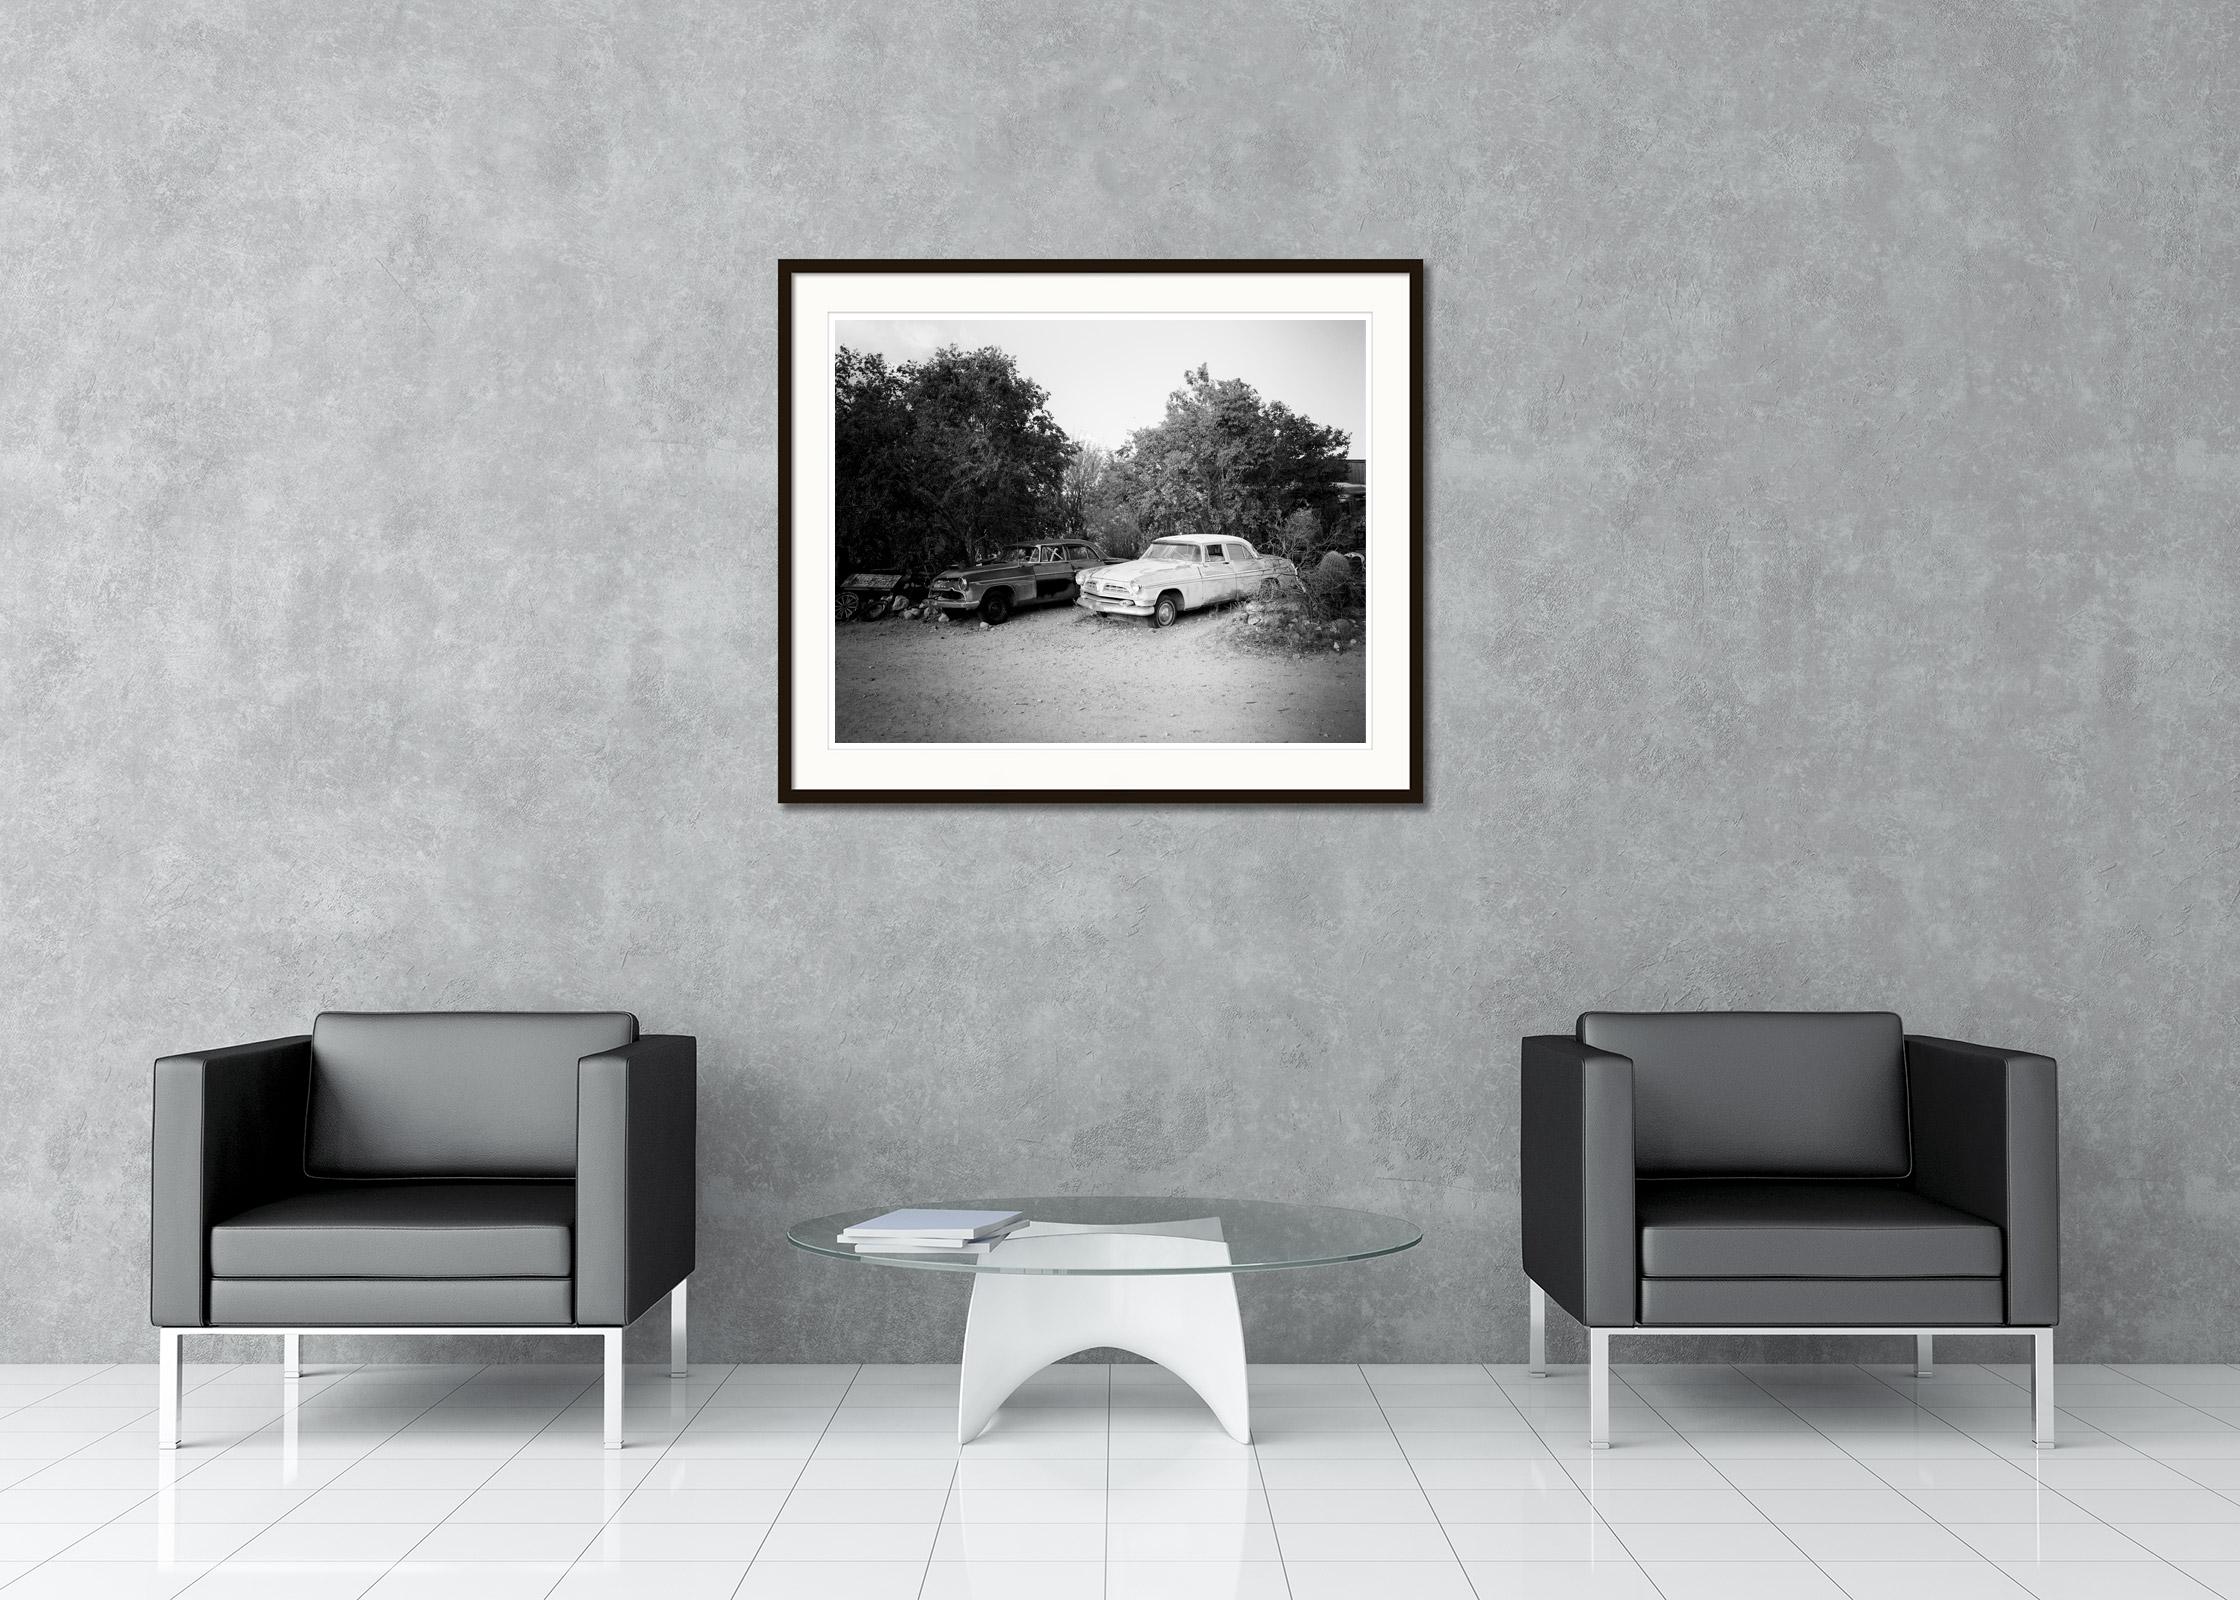 Black and white fine art landscape photography. Classic US car in a junkyard in California, USA. Archival pigment ink print, edition of 9. Signed, titled, dated and numbered by artist. Certificate of authenticity included. Printed with 4cm white